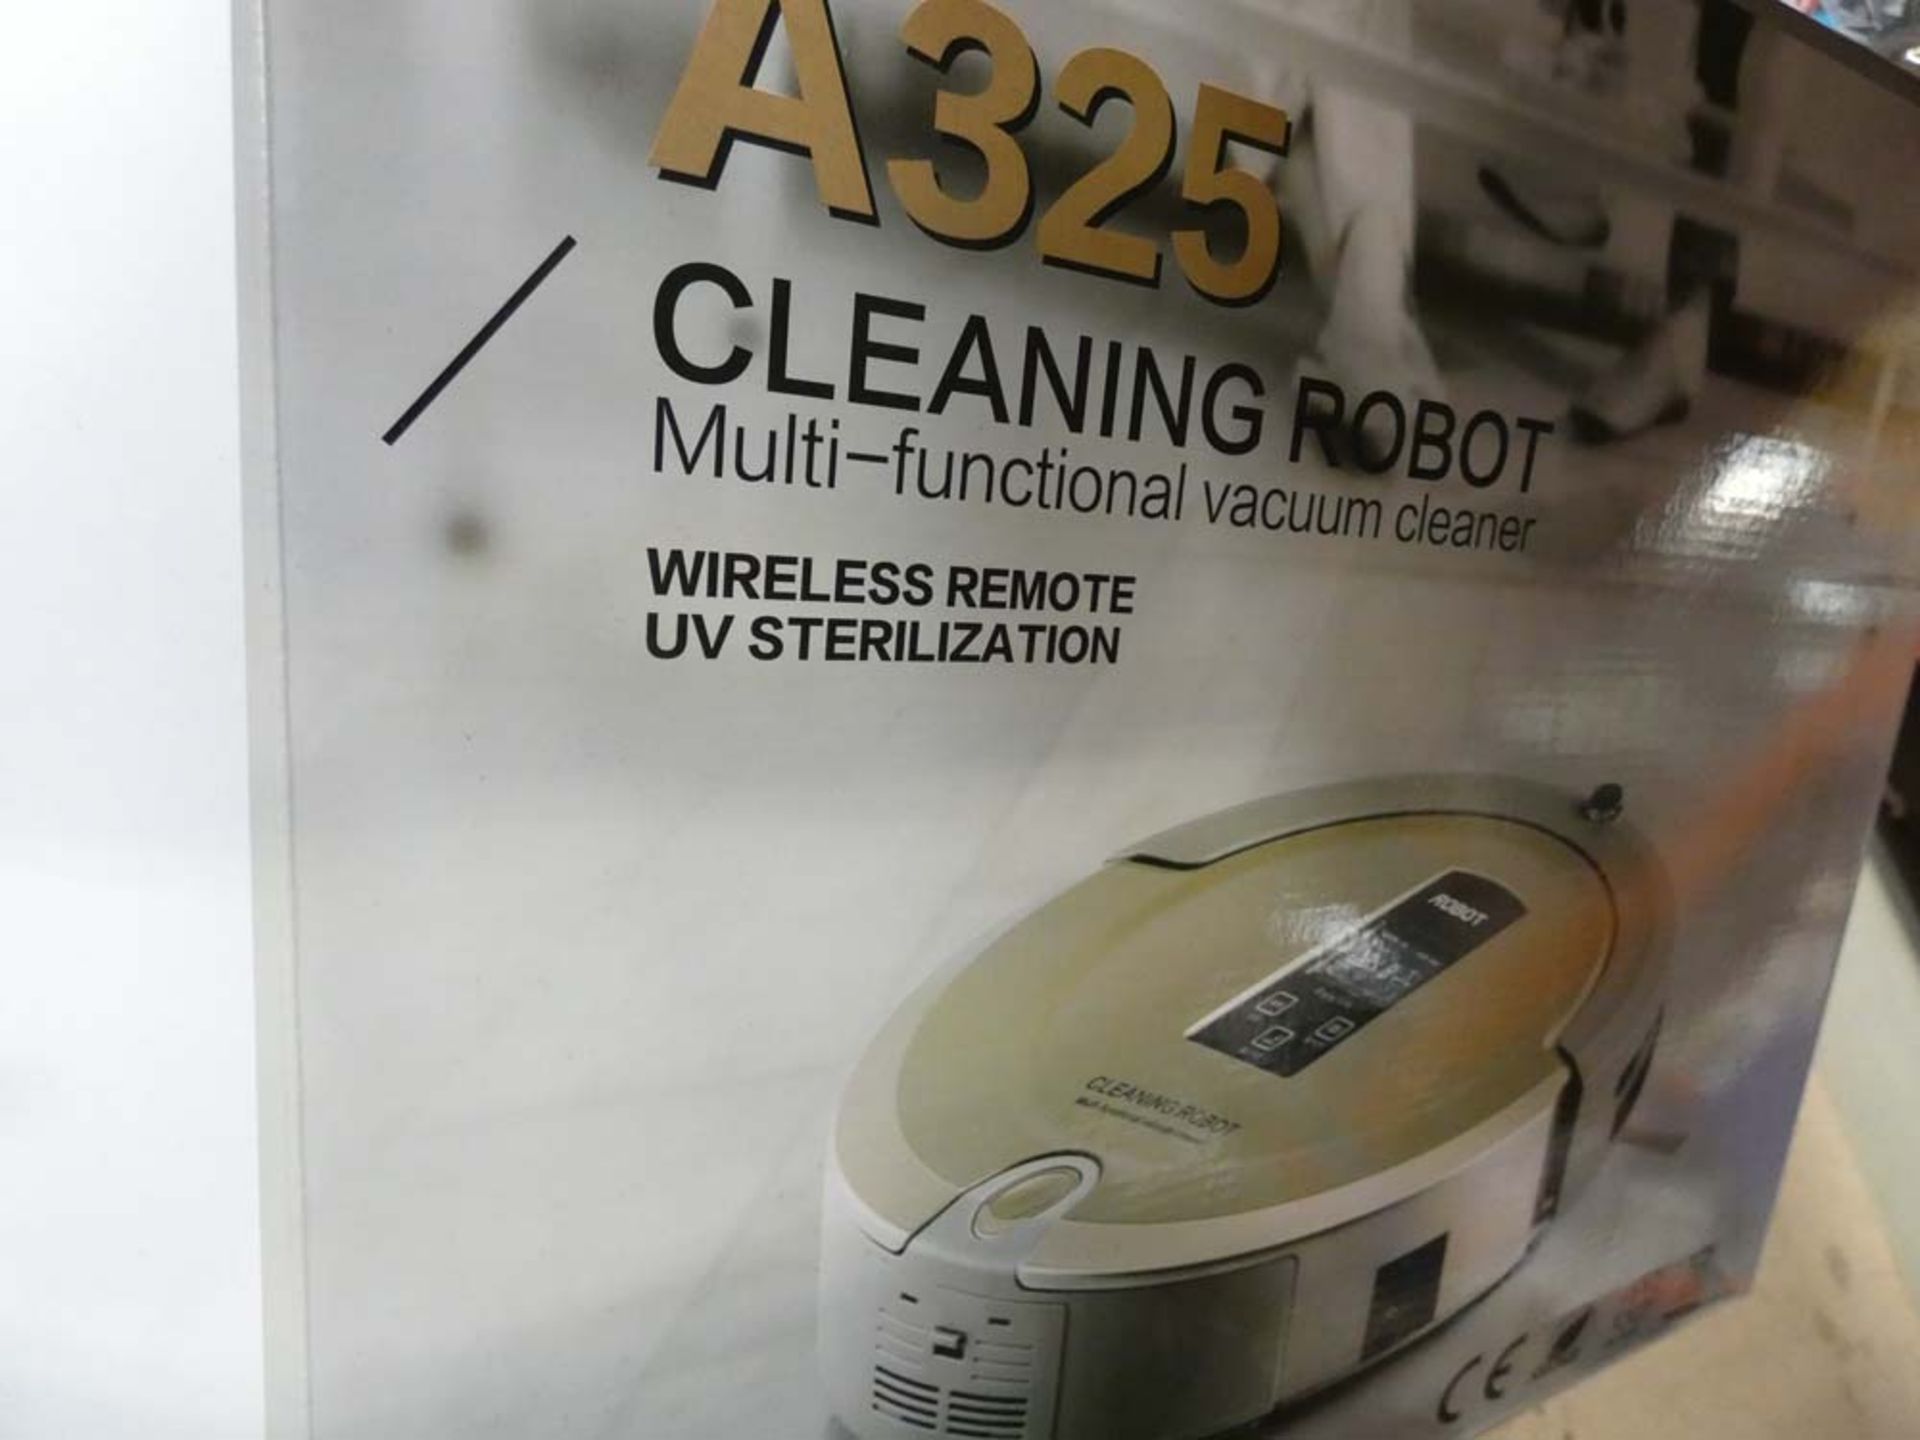 3017 - A3225 multi function cleaning robot - Image 2 of 2